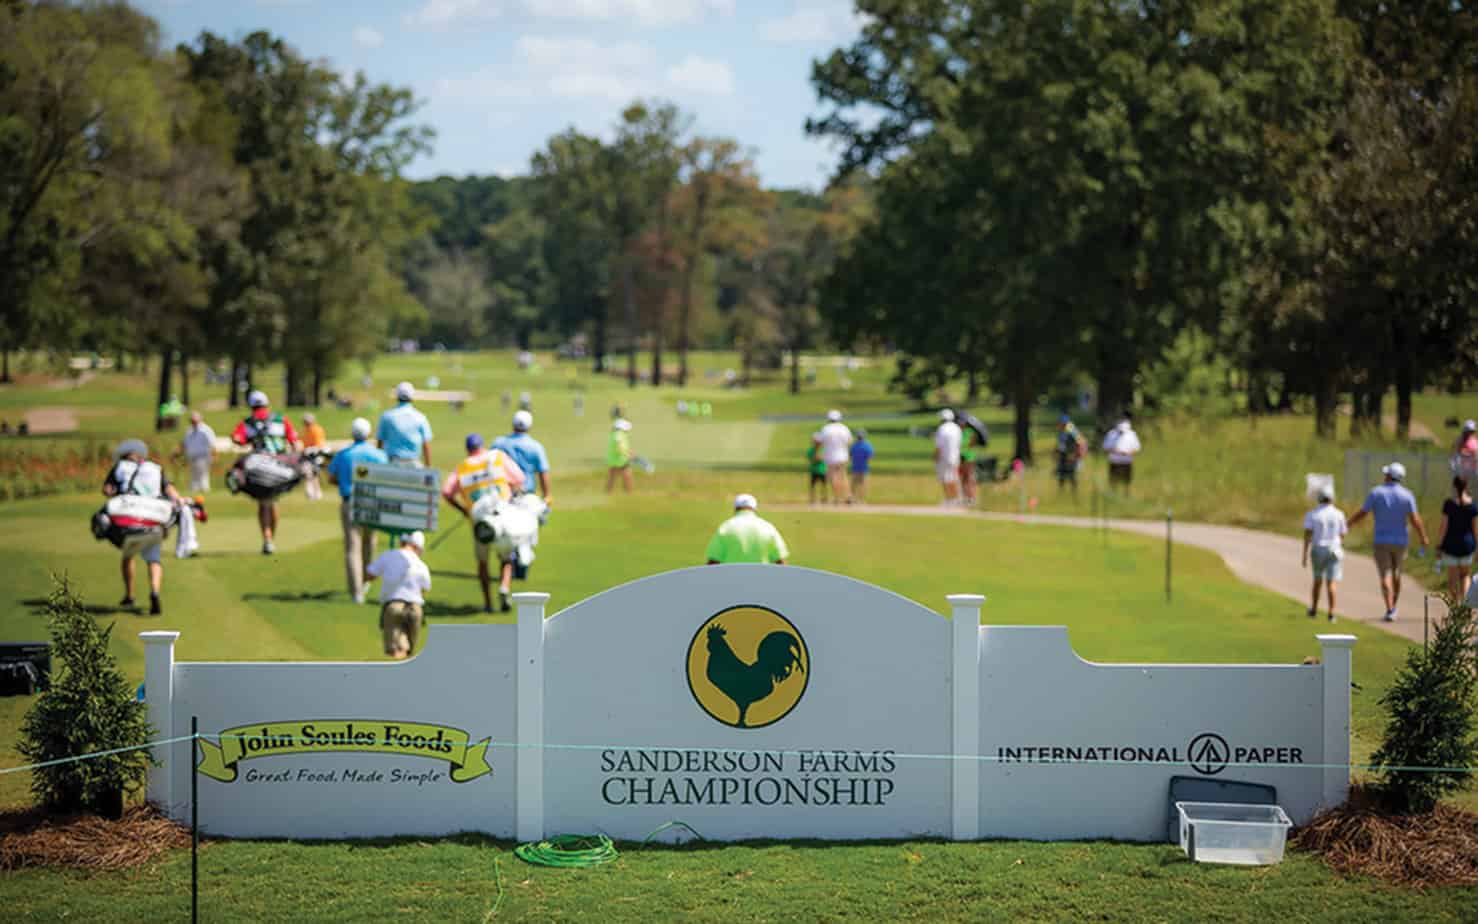 Sanderson Farms Championship – Preview and Betting Odds